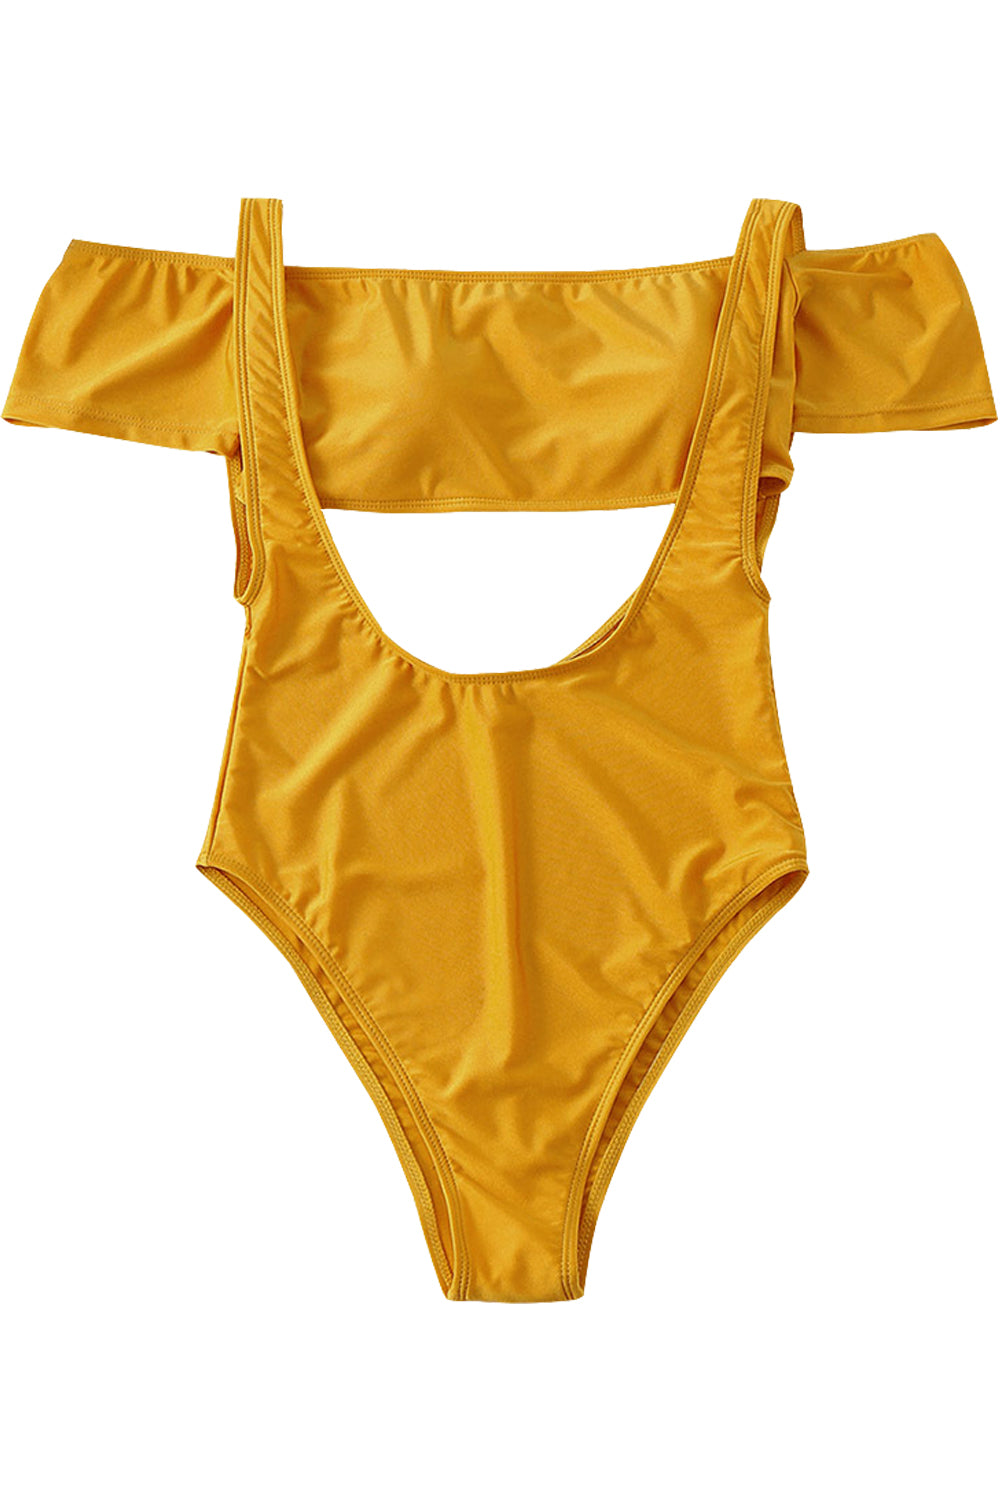 Iyasson Yellow Off-shoulder Hollow Out One-piece Swimsuit